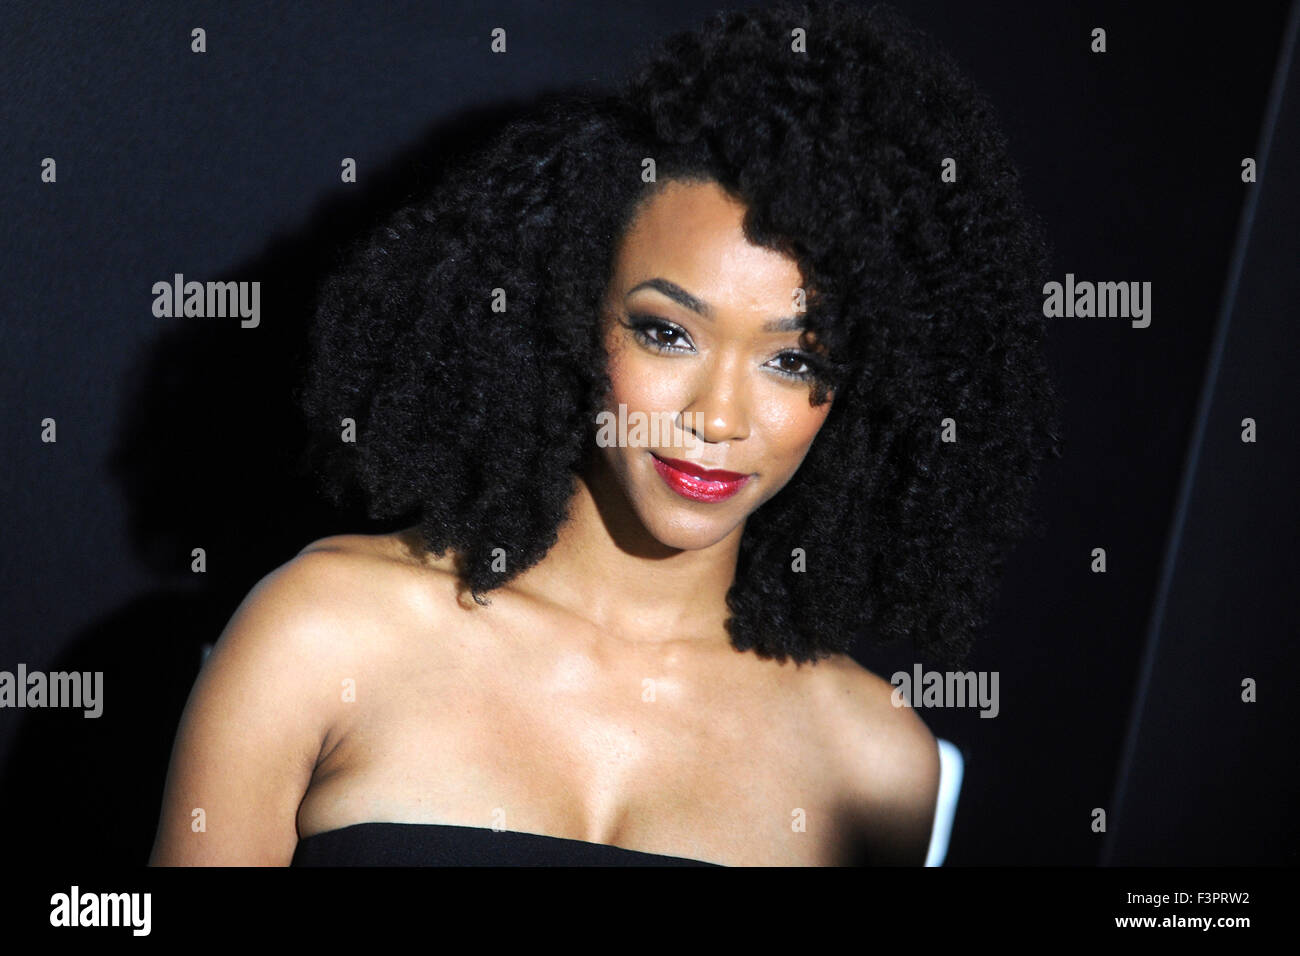 New York City. 9th Oct, 2015. Sonequa Martin-Green attends AMC's 'The Walking Dead' Season 6 Fan Premiere Event 2015 at Madison Square Garden on October 9, 2015 in New York City. © dpa/Alamy Live News Stock Photo